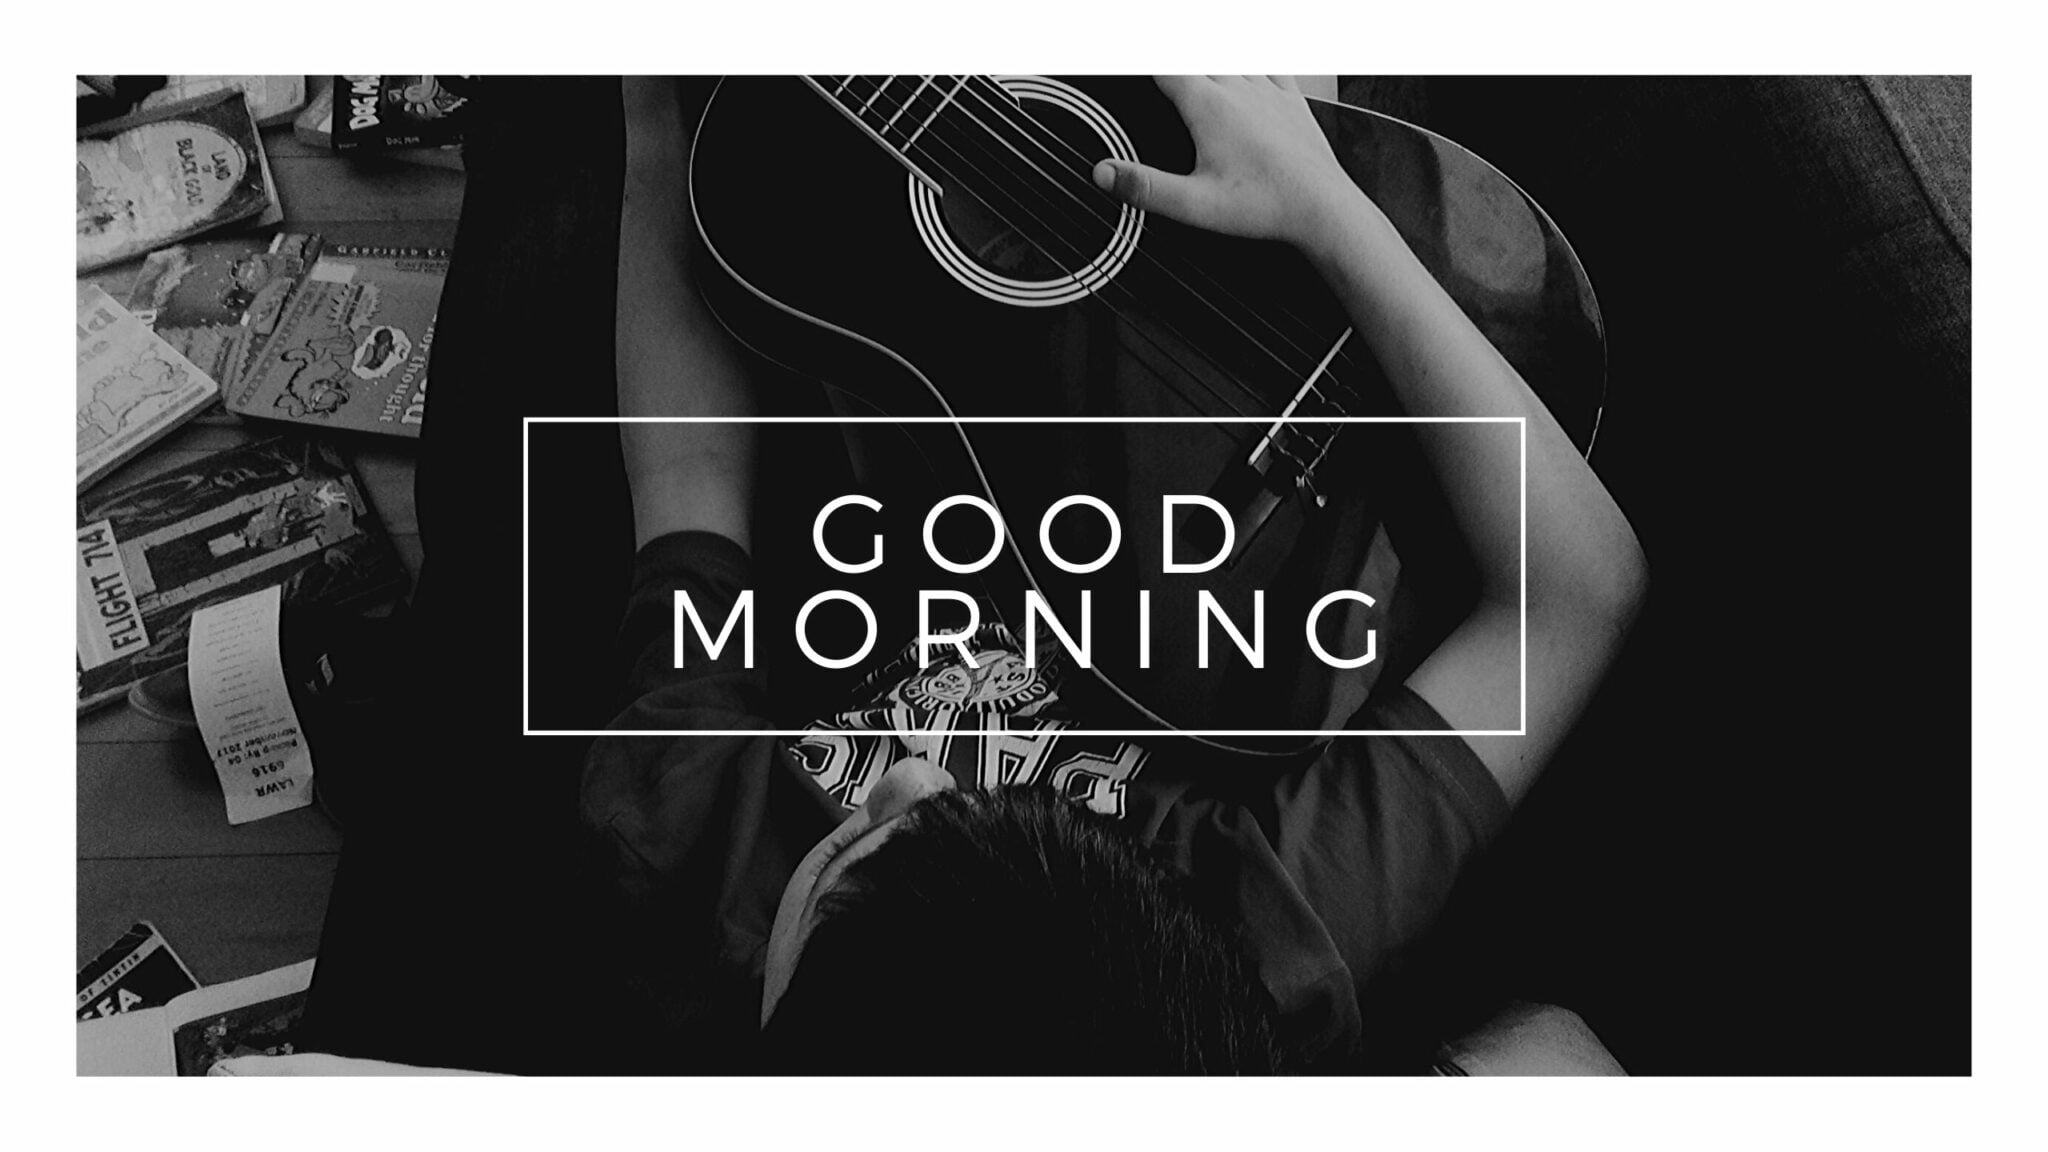 Good Morning with Guiter Image